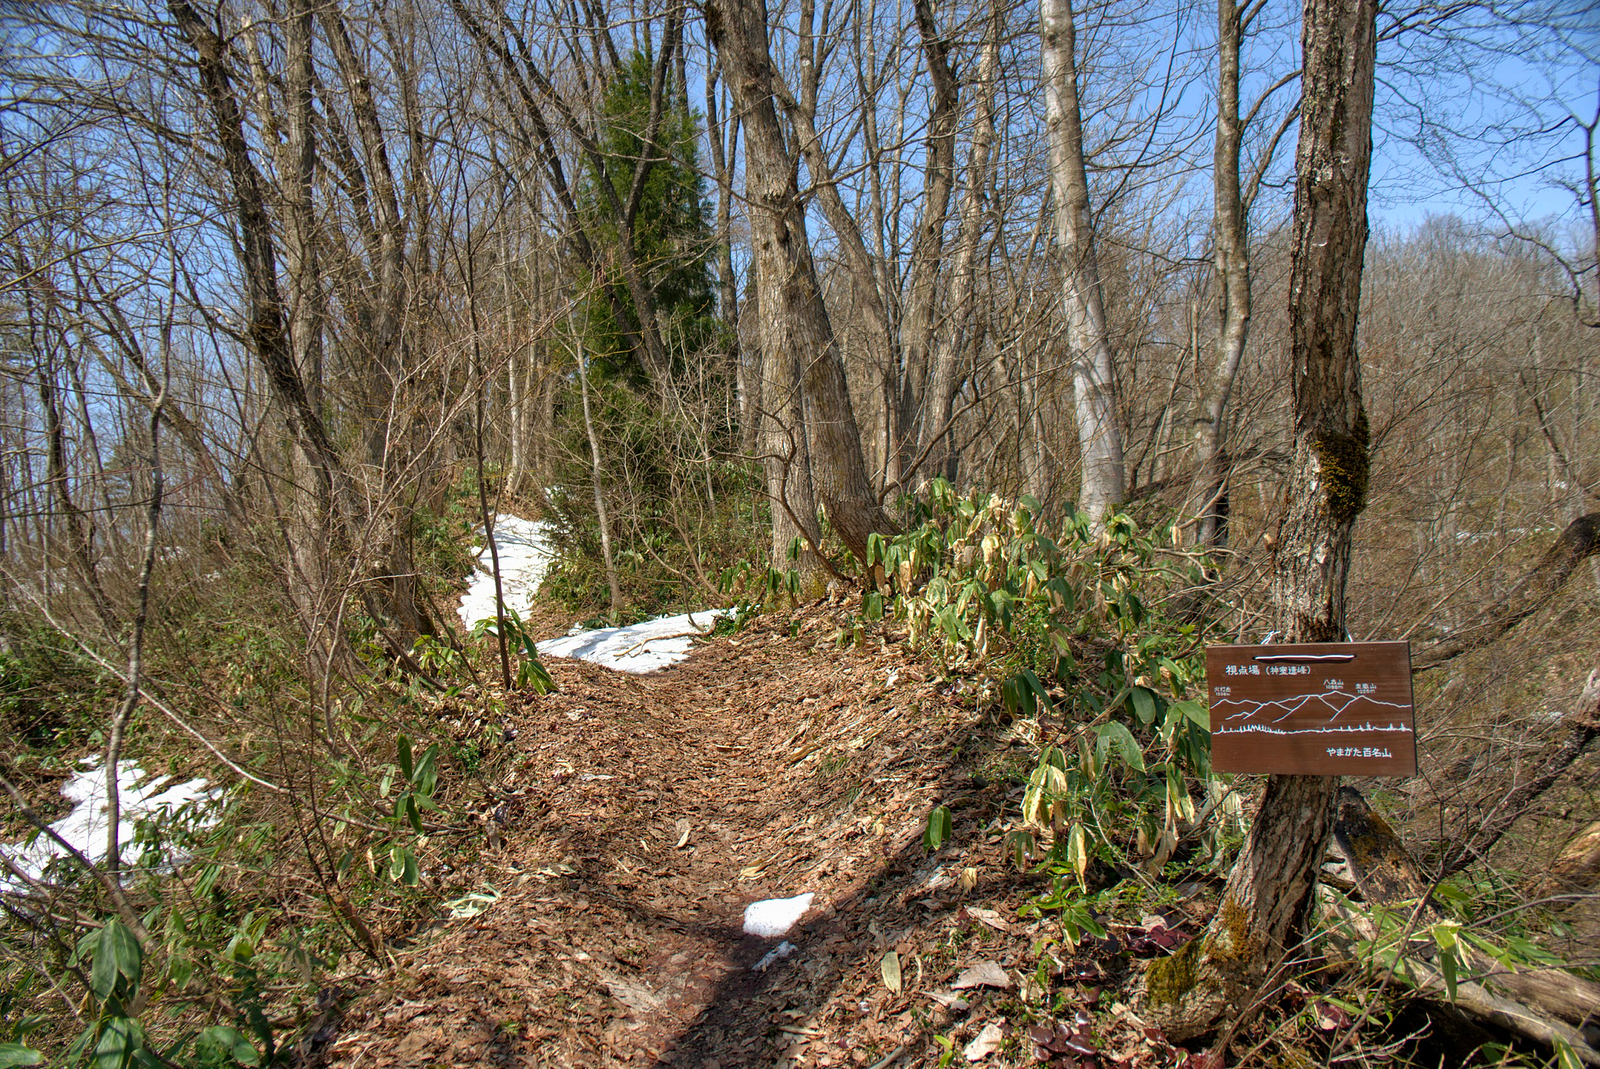 A mountain trail up Mt. Yamuki along a thin ridge with snow blocking the path and a sign in the foreground.